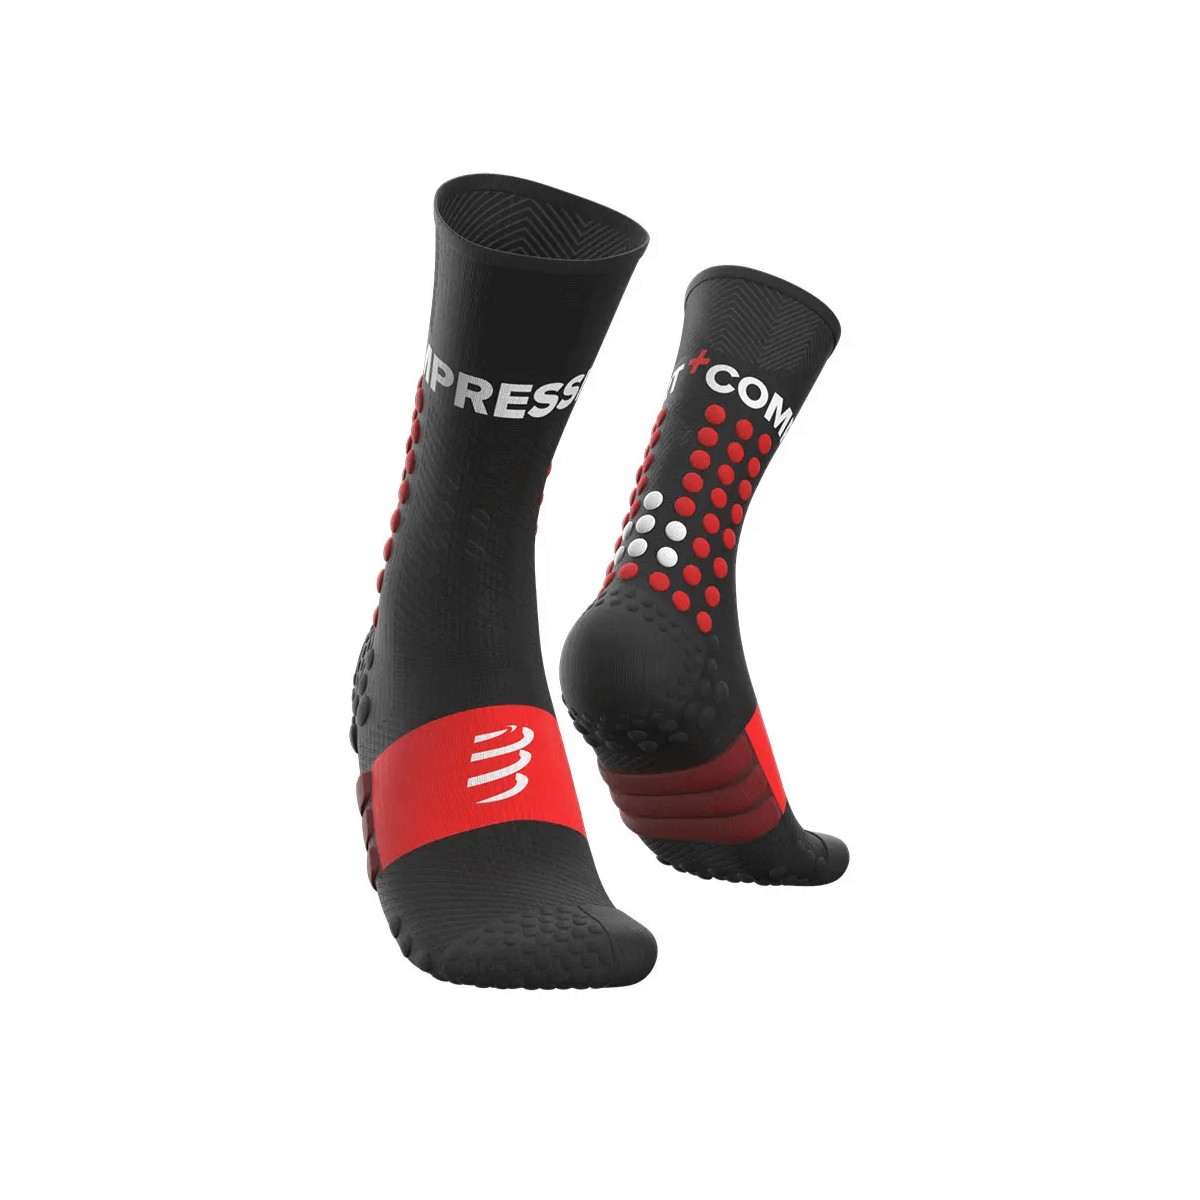 Chaussettes Compressport Ultra Trail Noir, Taille Taille 2